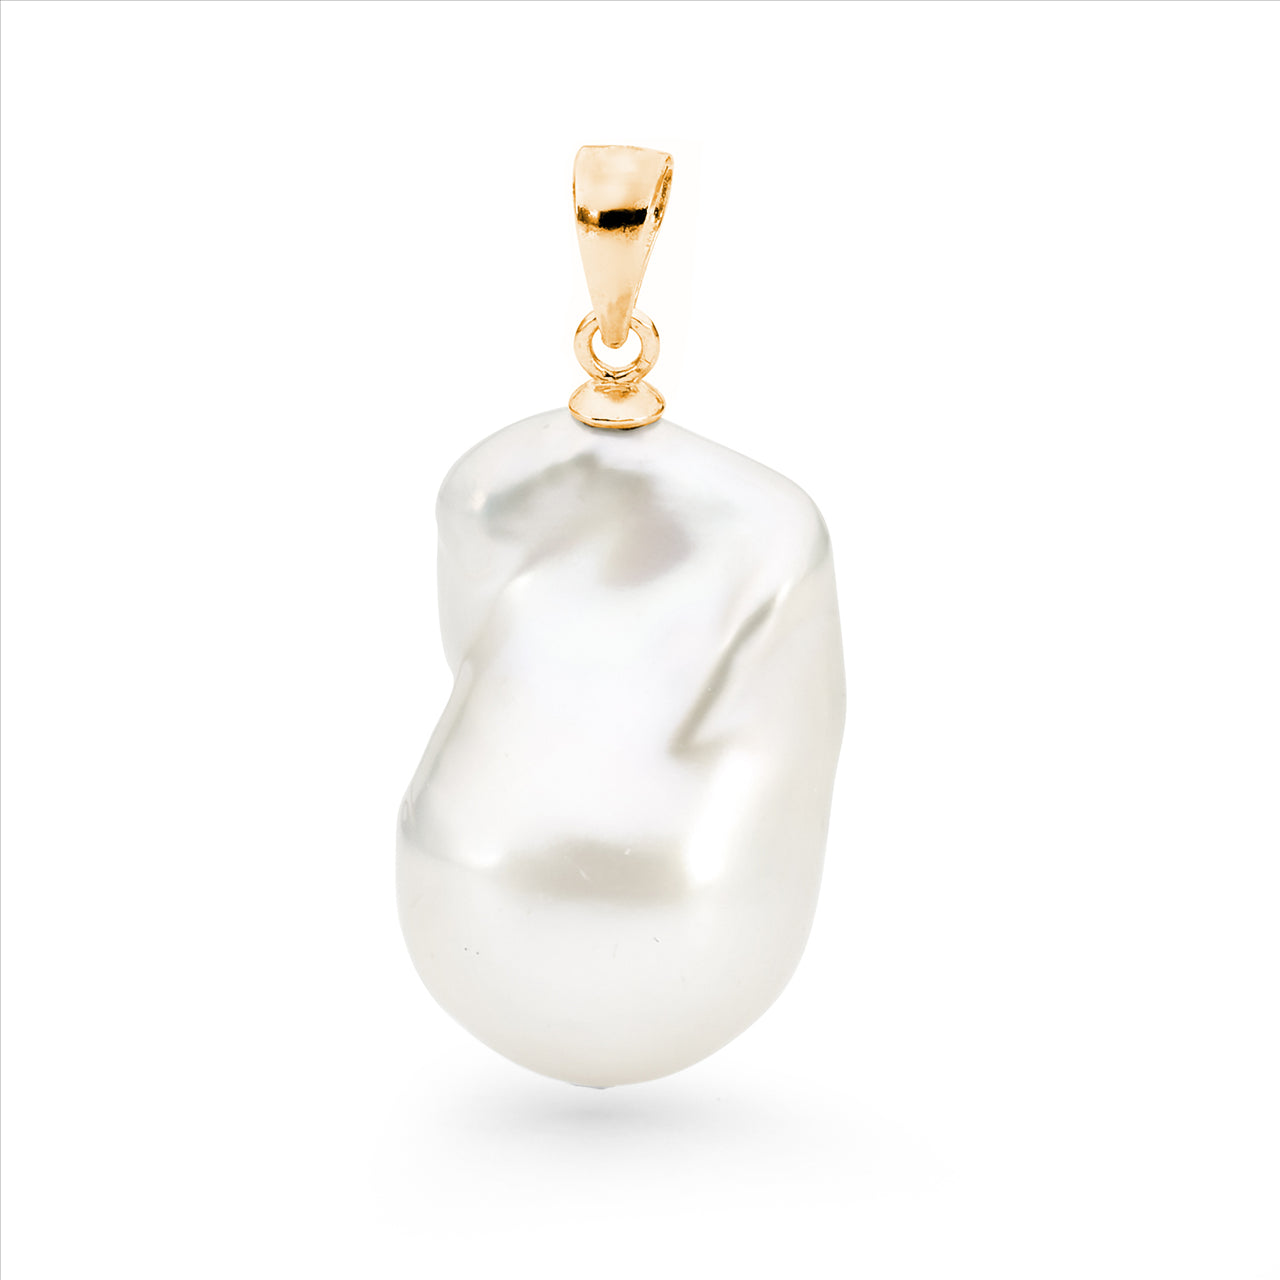 Ikecho 9ct Yellow Gold White Baroque Pearl Pendant